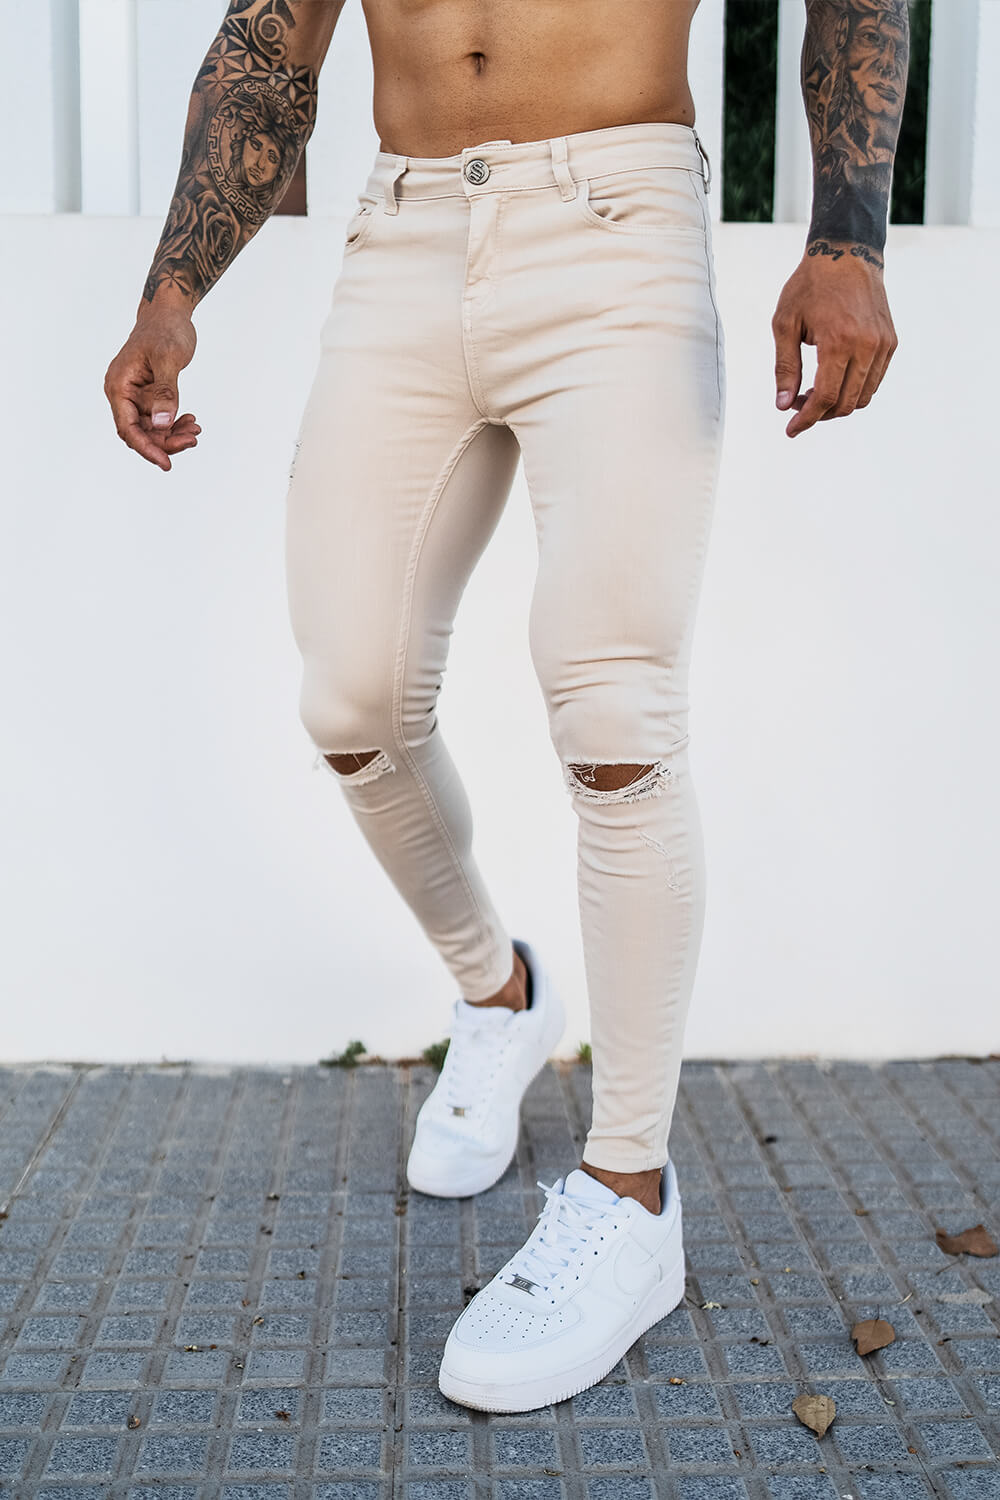 Sinners Attire Jeans | Men's Ripped & Repaired Jeans | Jeans for Men - SINNERS ATTIRE